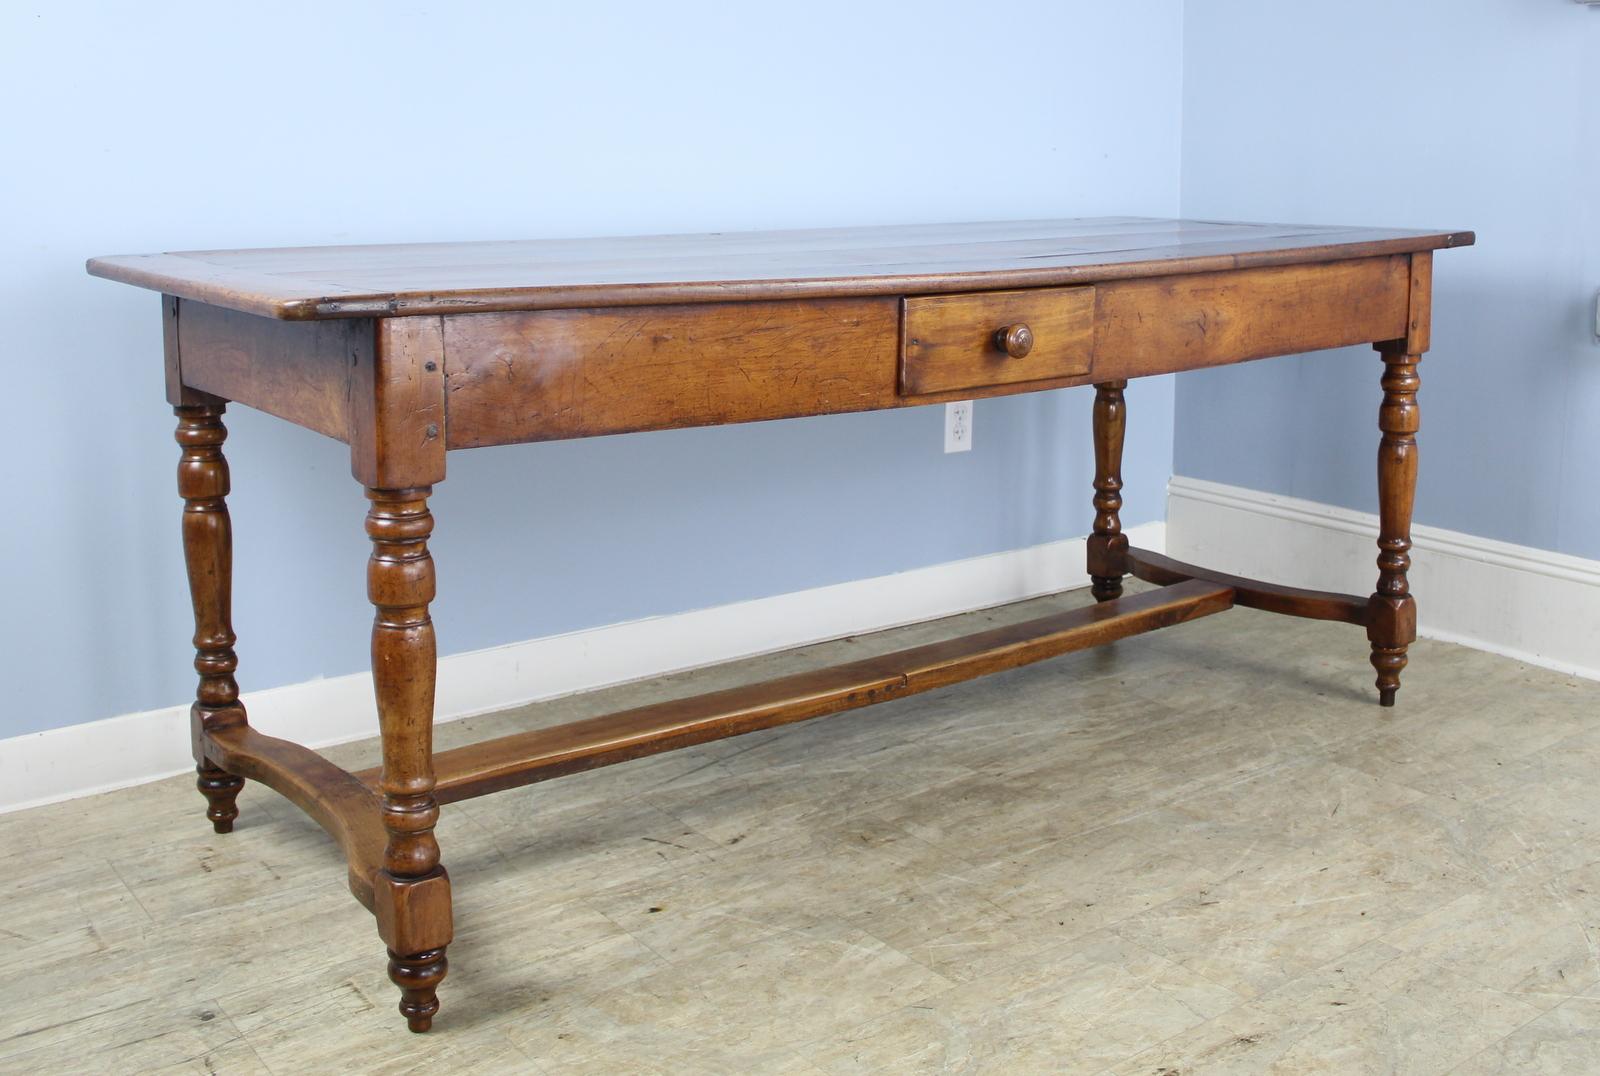 A stunning early dining table with chunky turned legs and a trestle base, all done in mellow fruitwood. The patina and grain on this piece are exceptional. It's bold look would make this wonderful in a country home, or as a library table in a more